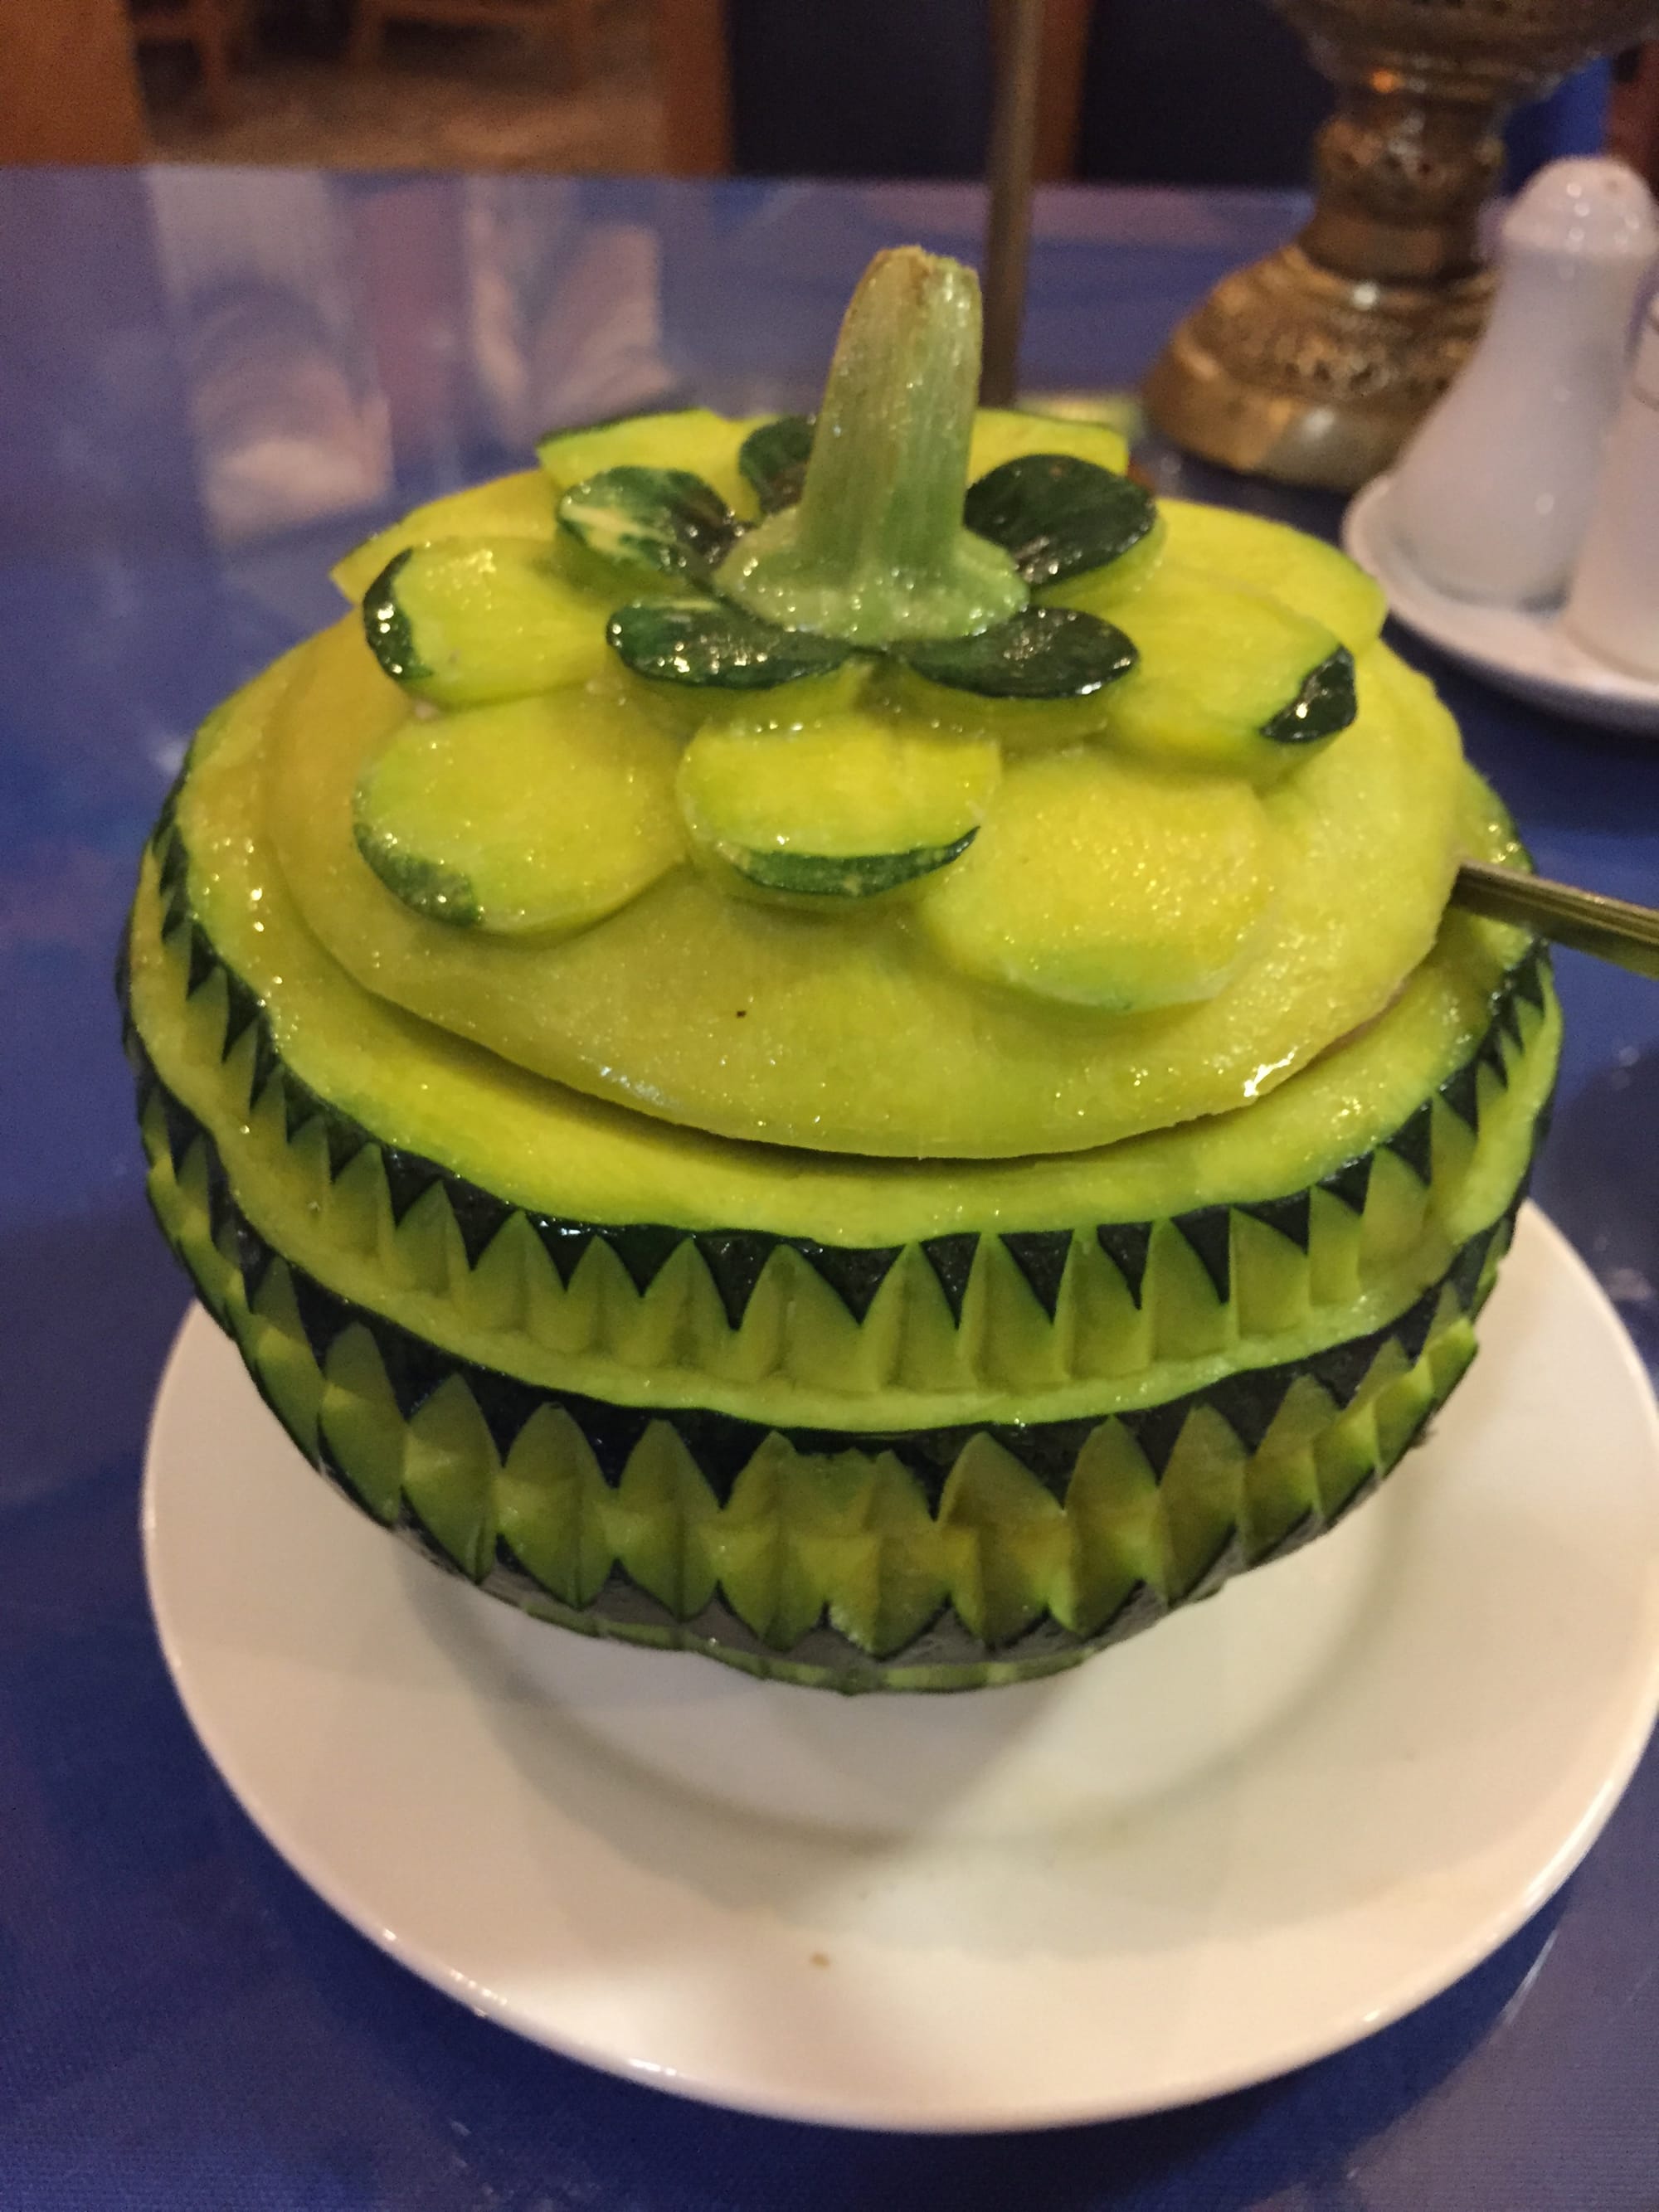 Photo by Author — steamed seafood — pot or carved melon?